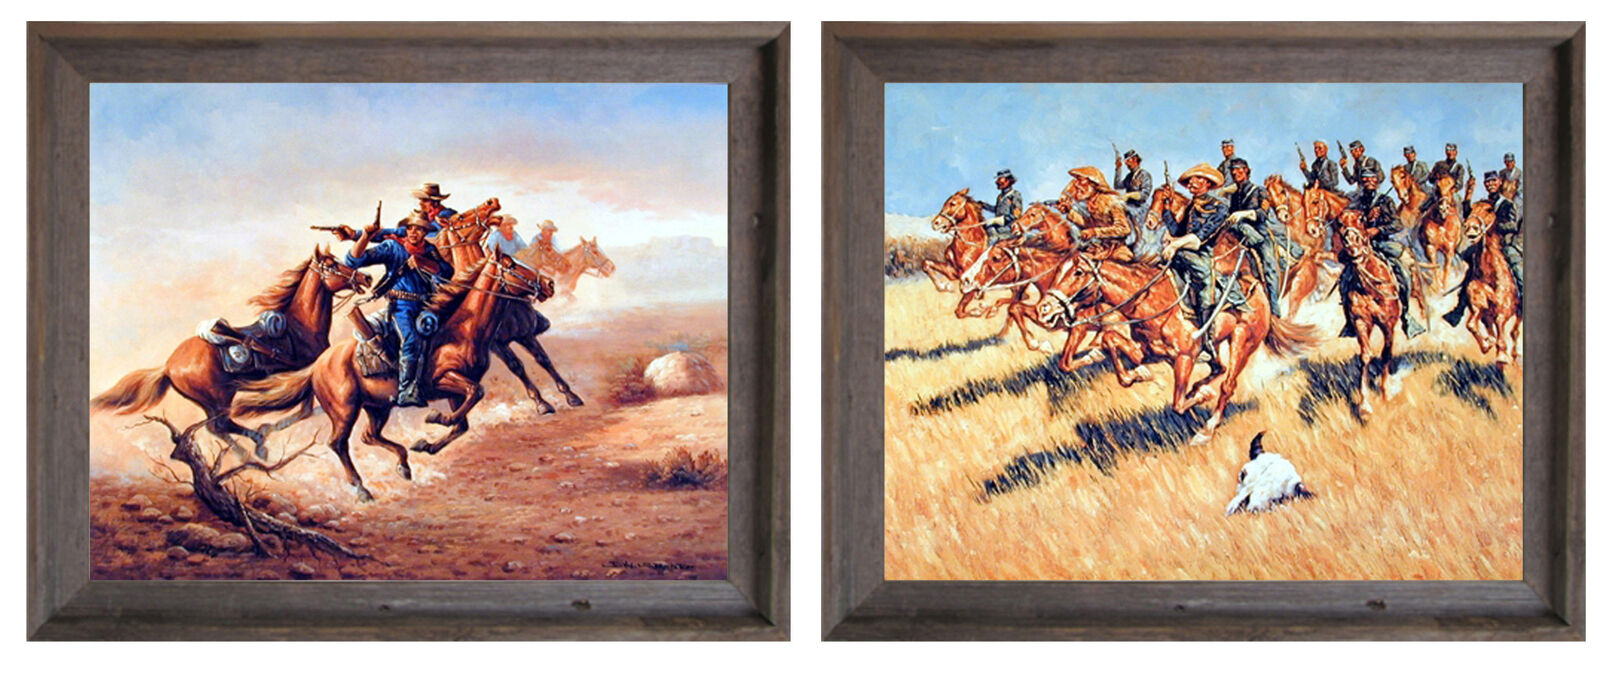 Civil War Blue Soldiers Shoot Out Two Set 16x20 Framed Wall Decor Art Print Post